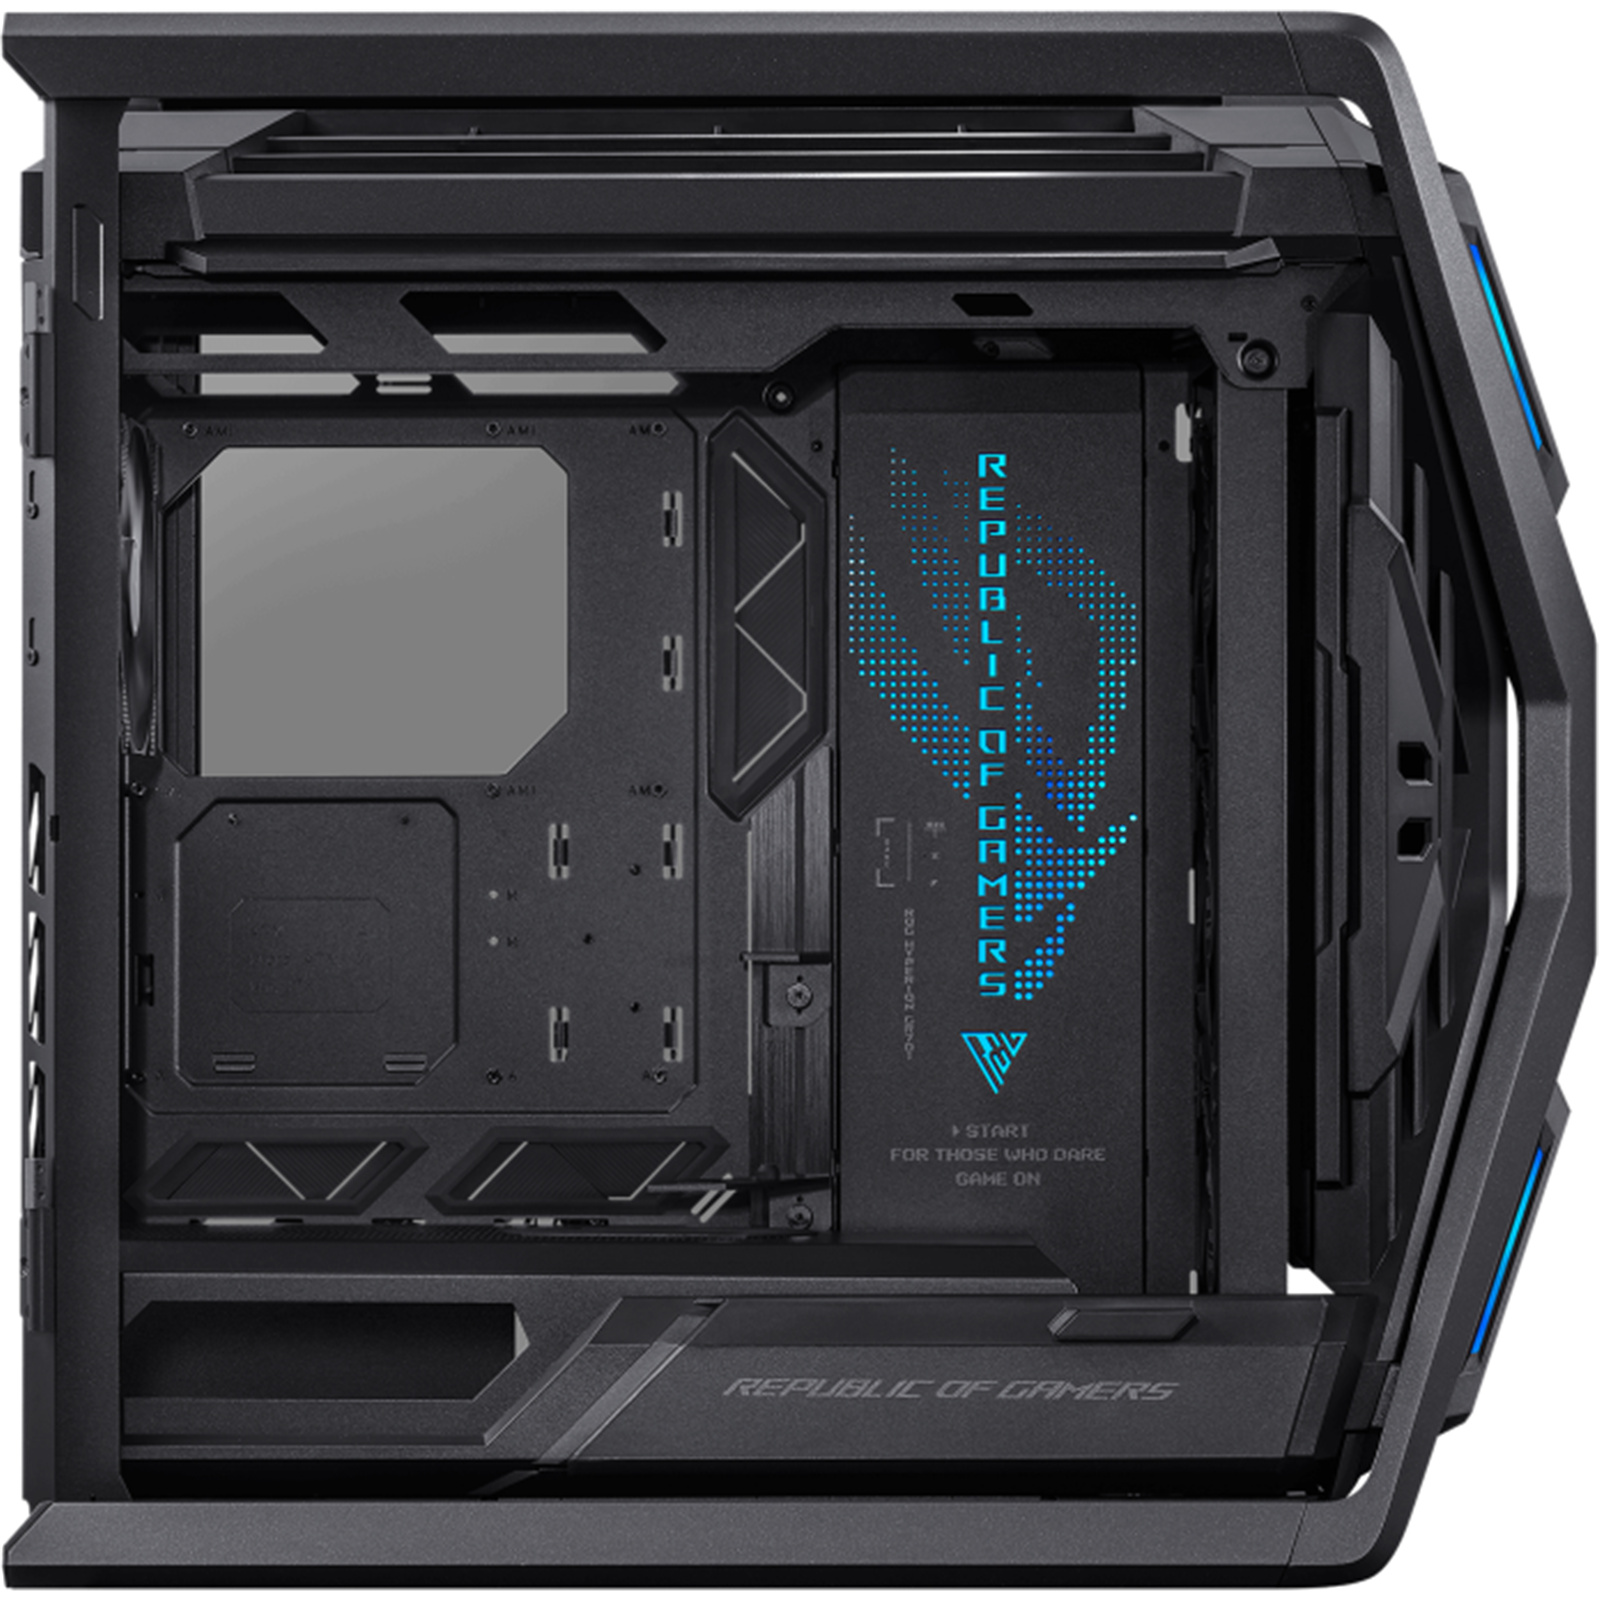 ASUS's new ROG Hyperion GR701 full-tower gaming case looks pretty crazy